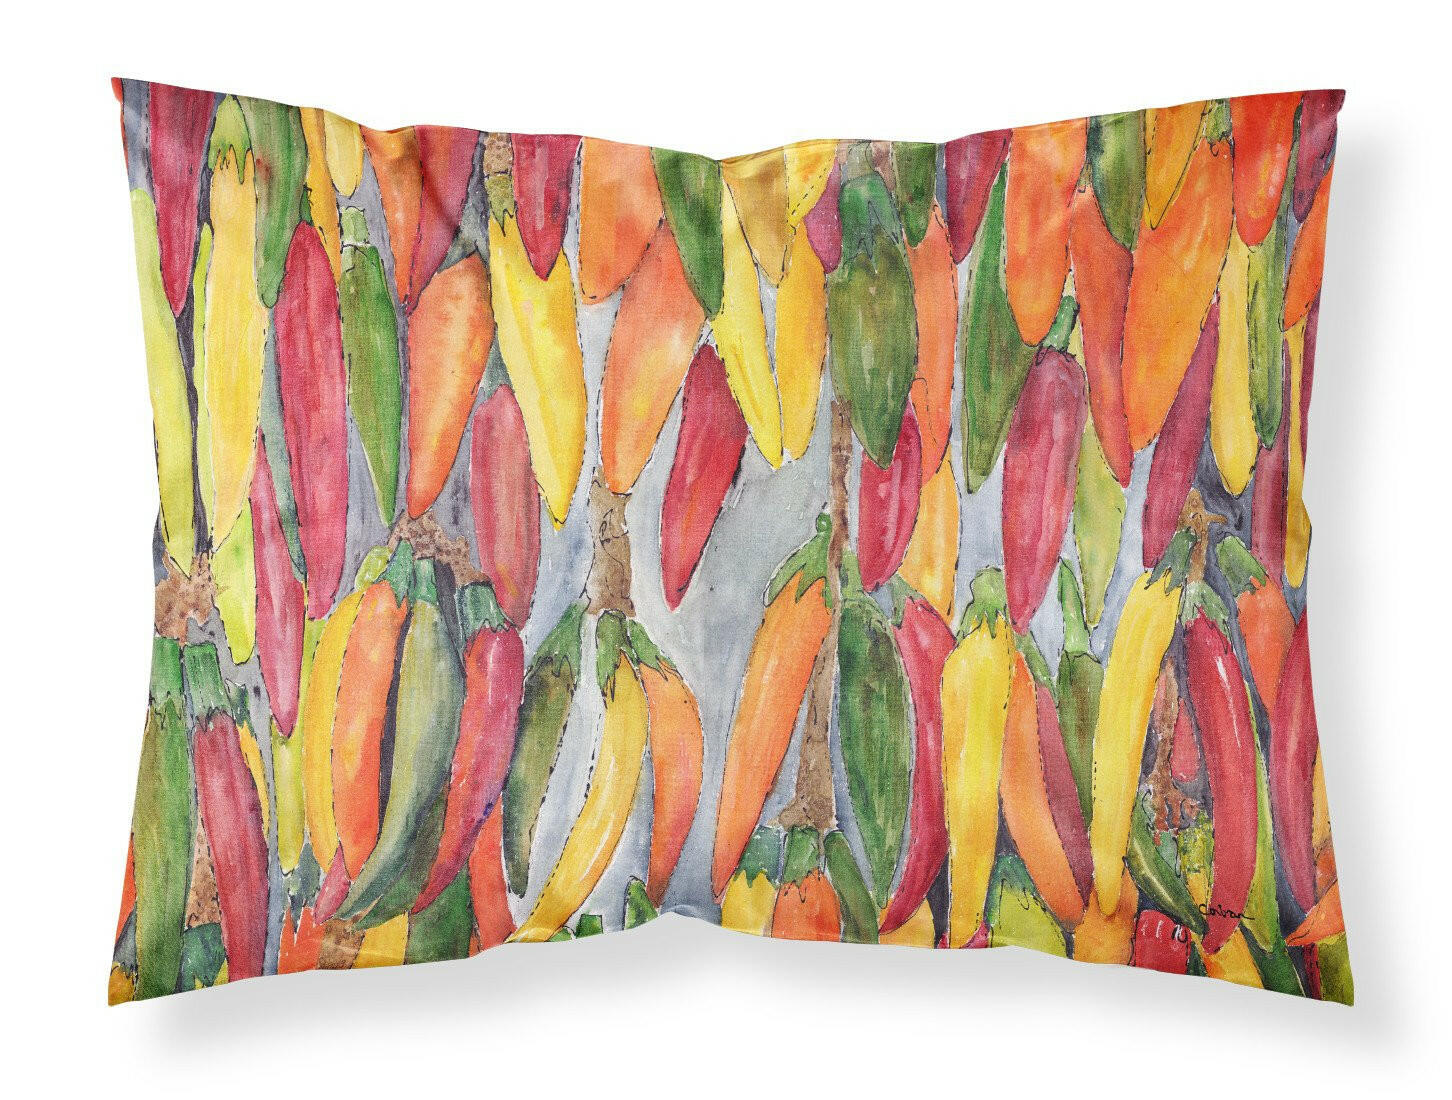 Hot Peppers Moisture wicking Fabric standard pillowcase by Caroline's Treasures